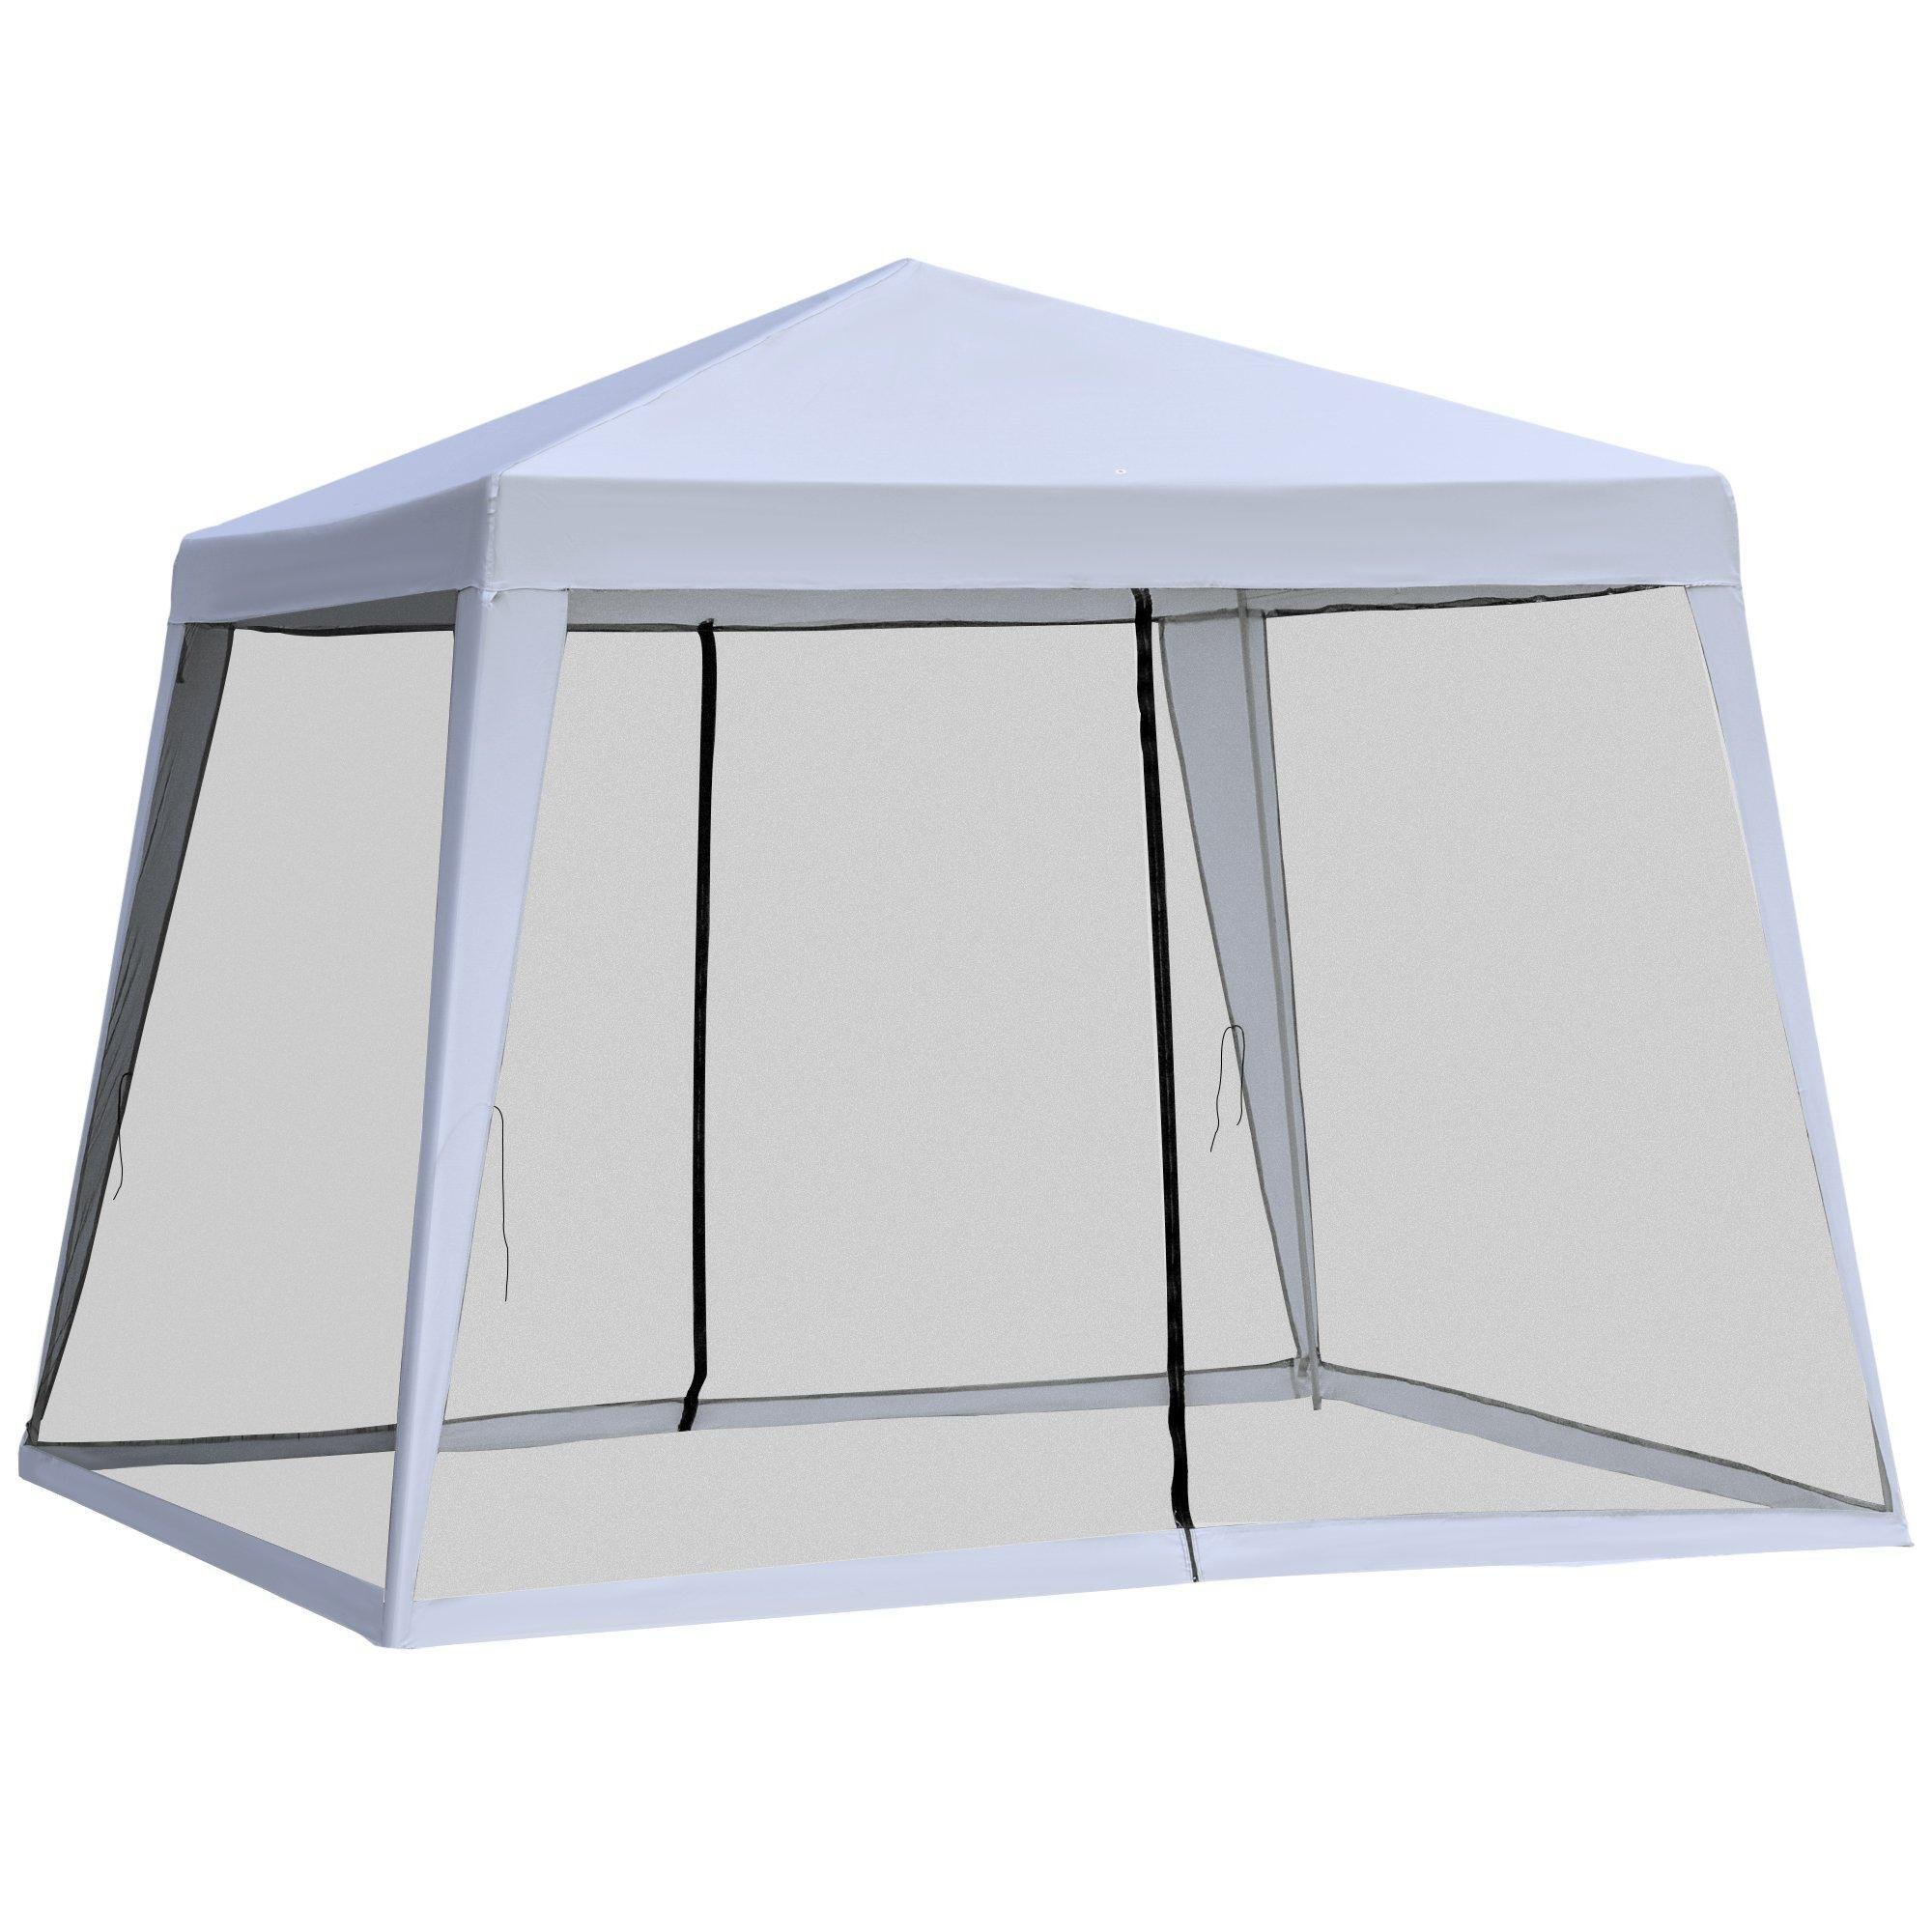 3x3m Outdoor Gazebo Canopy Tent Event Shelter with Mesh Screen Side - image 1